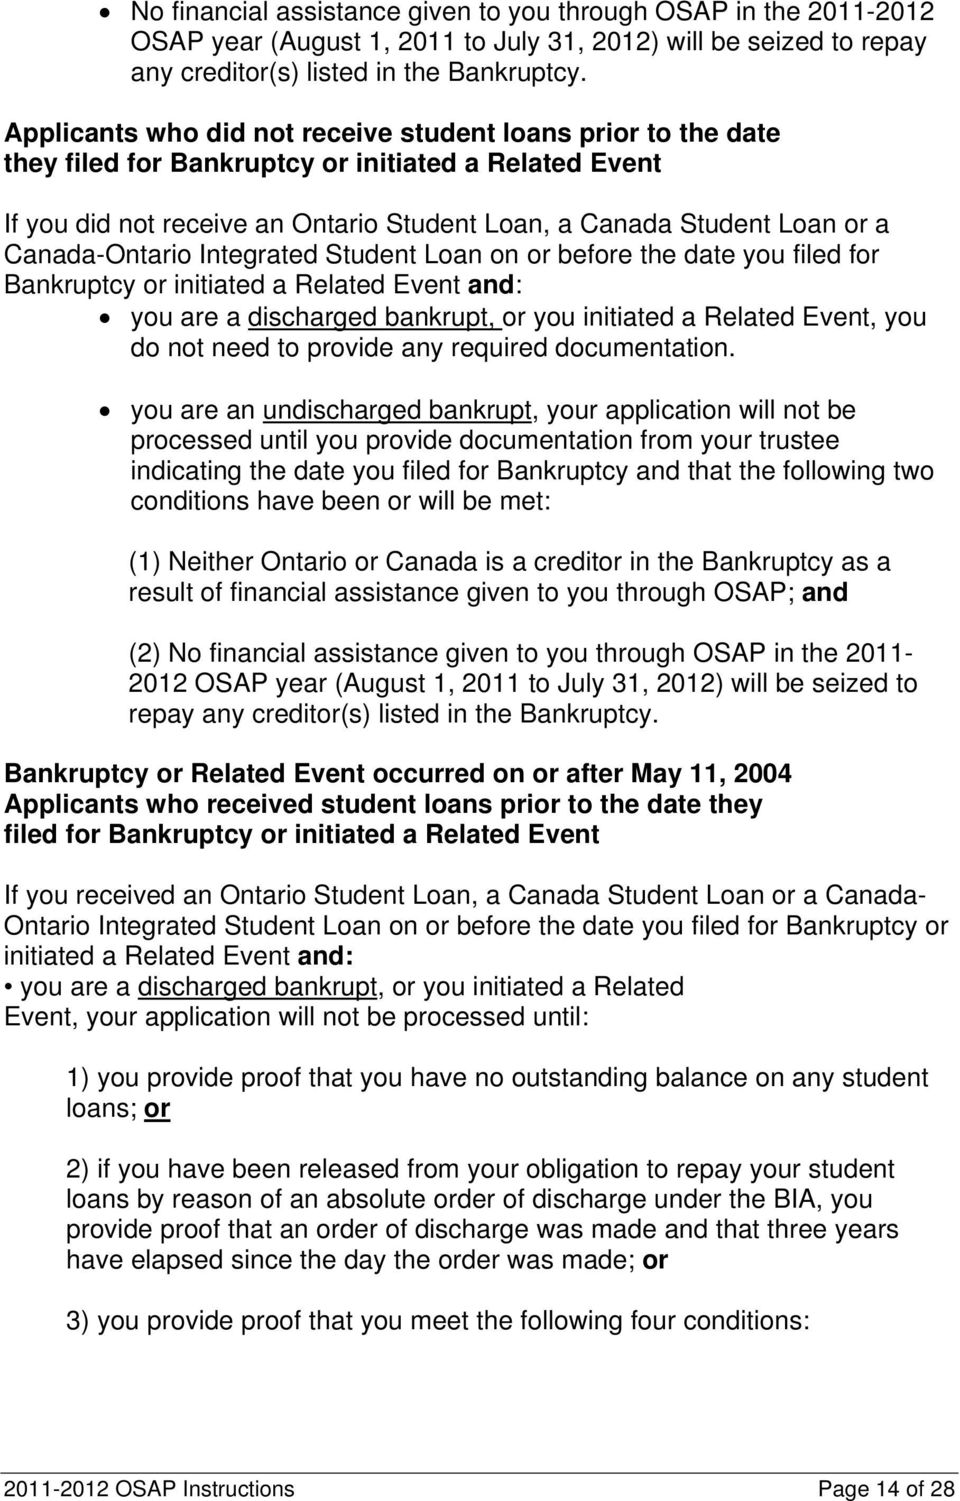 Canada-Ontario Integrated Student Loan on or before the date you filed for Bankruptcy or initiated a Related Event and: you are a discharged bankrupt, or you initiated a Related Event, you do not